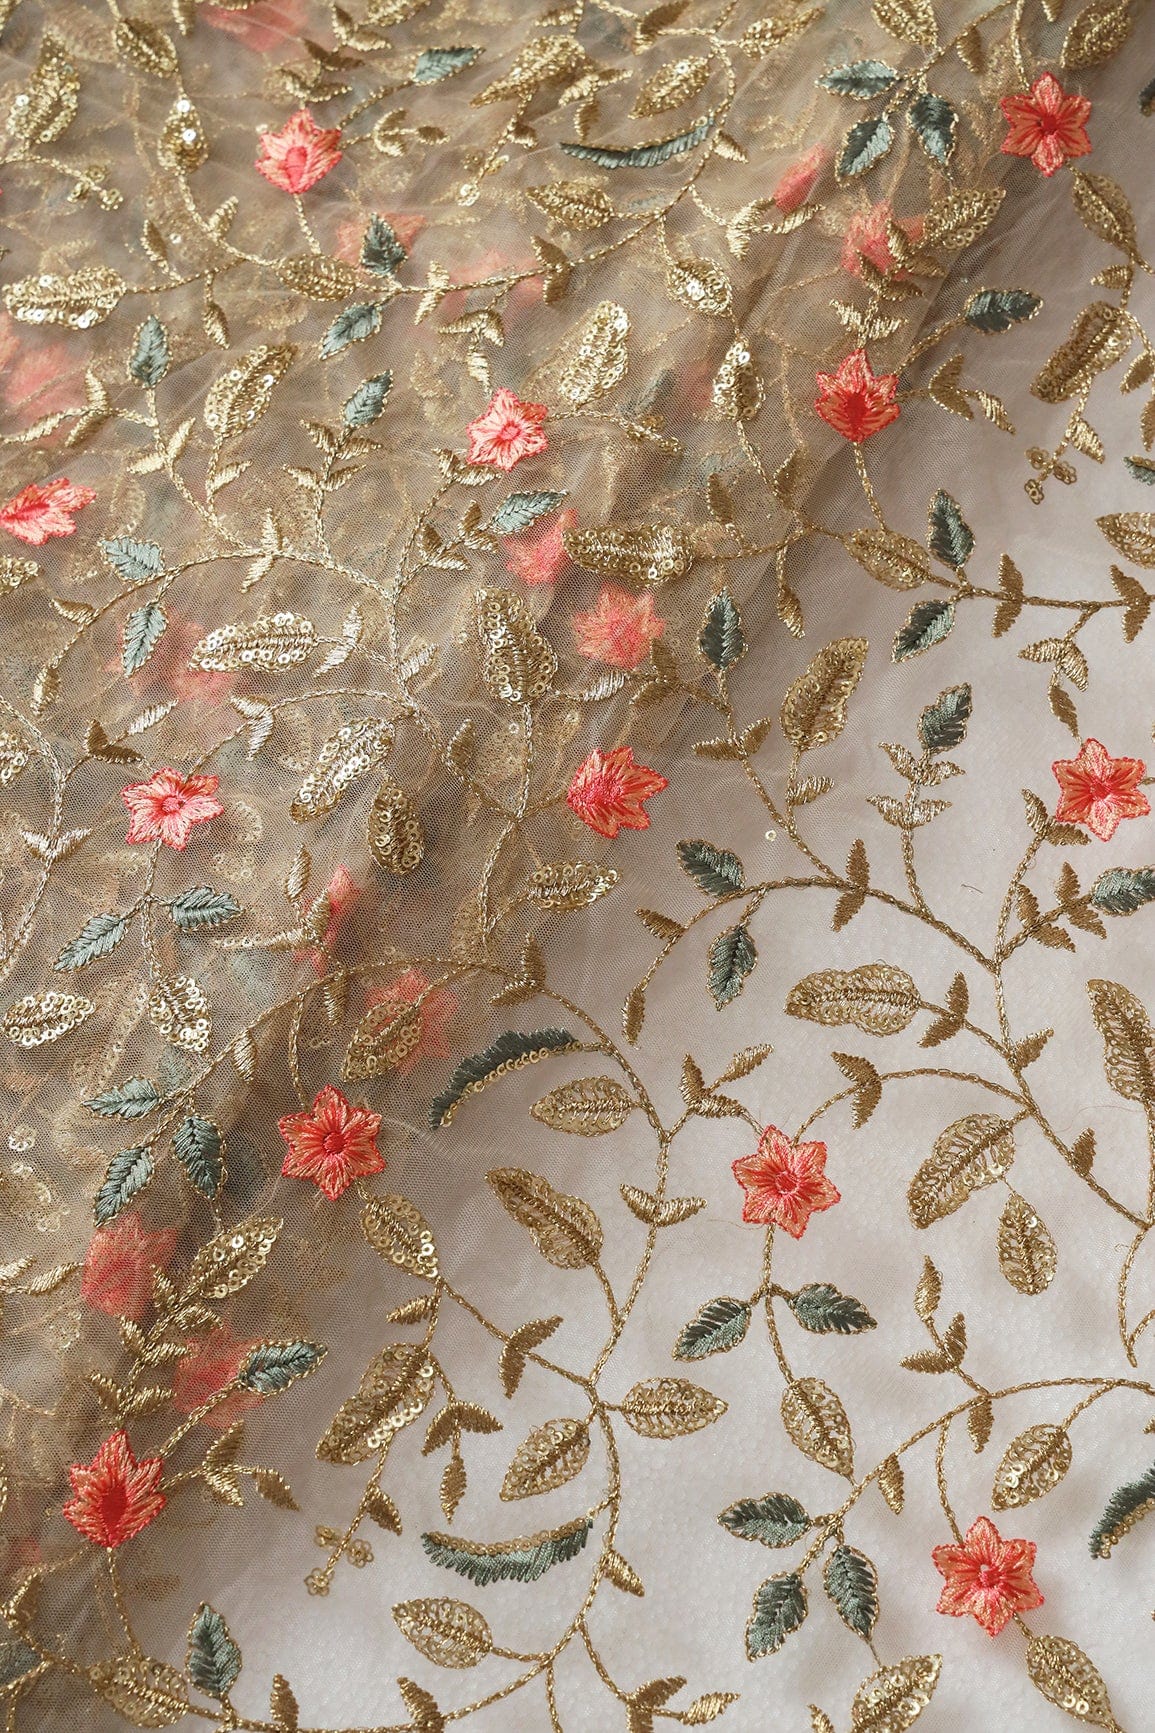 doeraa Embroidery Fabrics Peach And Beige Thread With Gold Sequins Floral Heavy Embroidery Work On Beige Soft Net Fabric